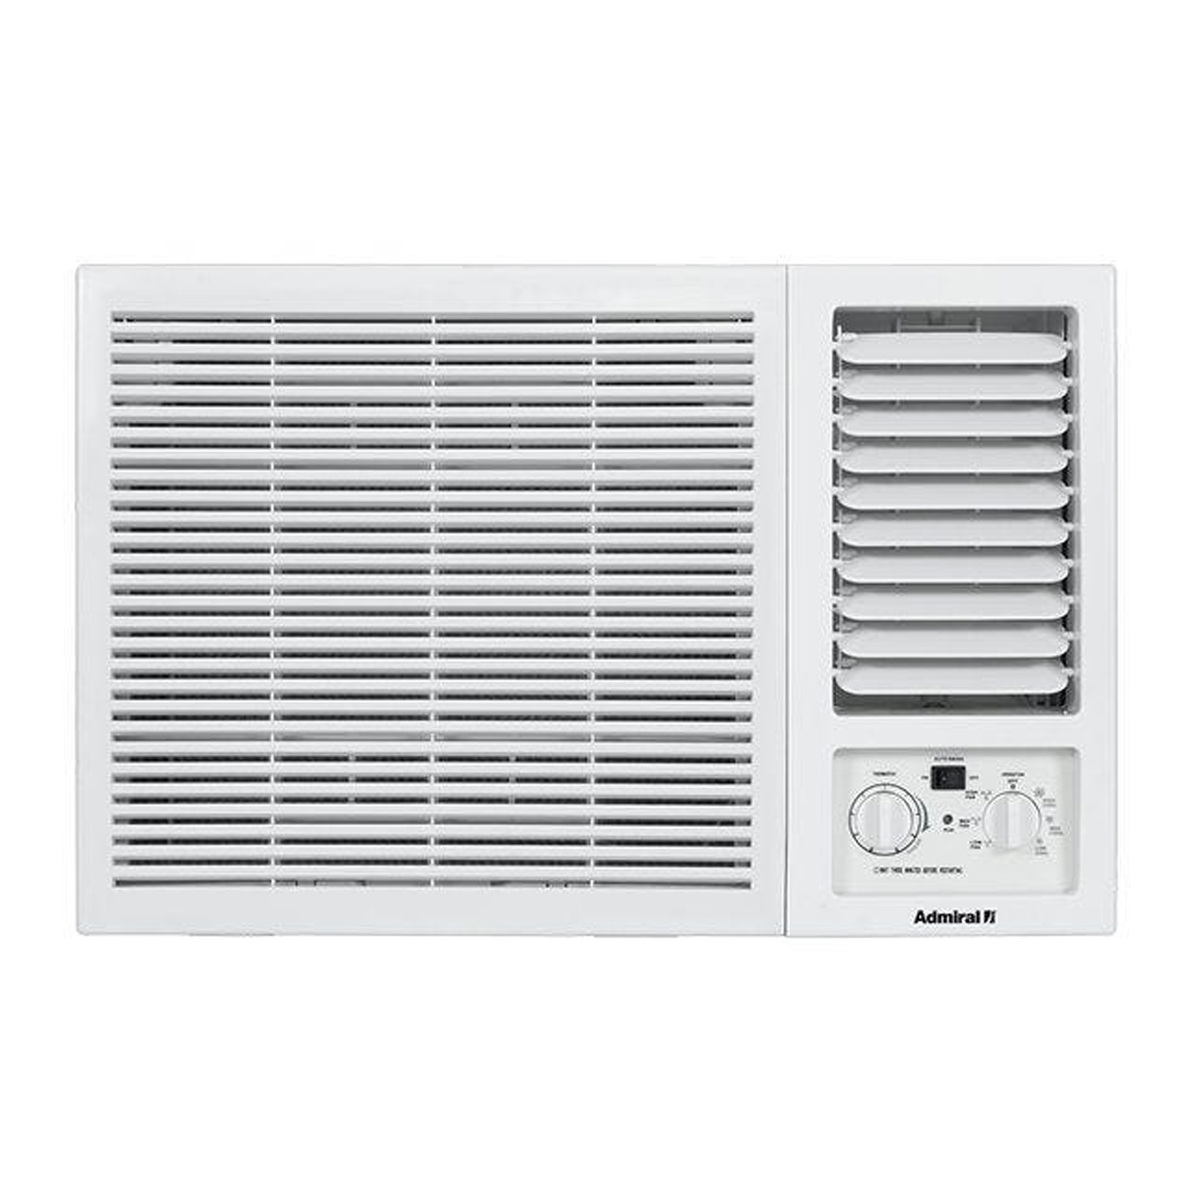 Admiral Window Air Conditioner, 2 T, White, AD24KT3WC